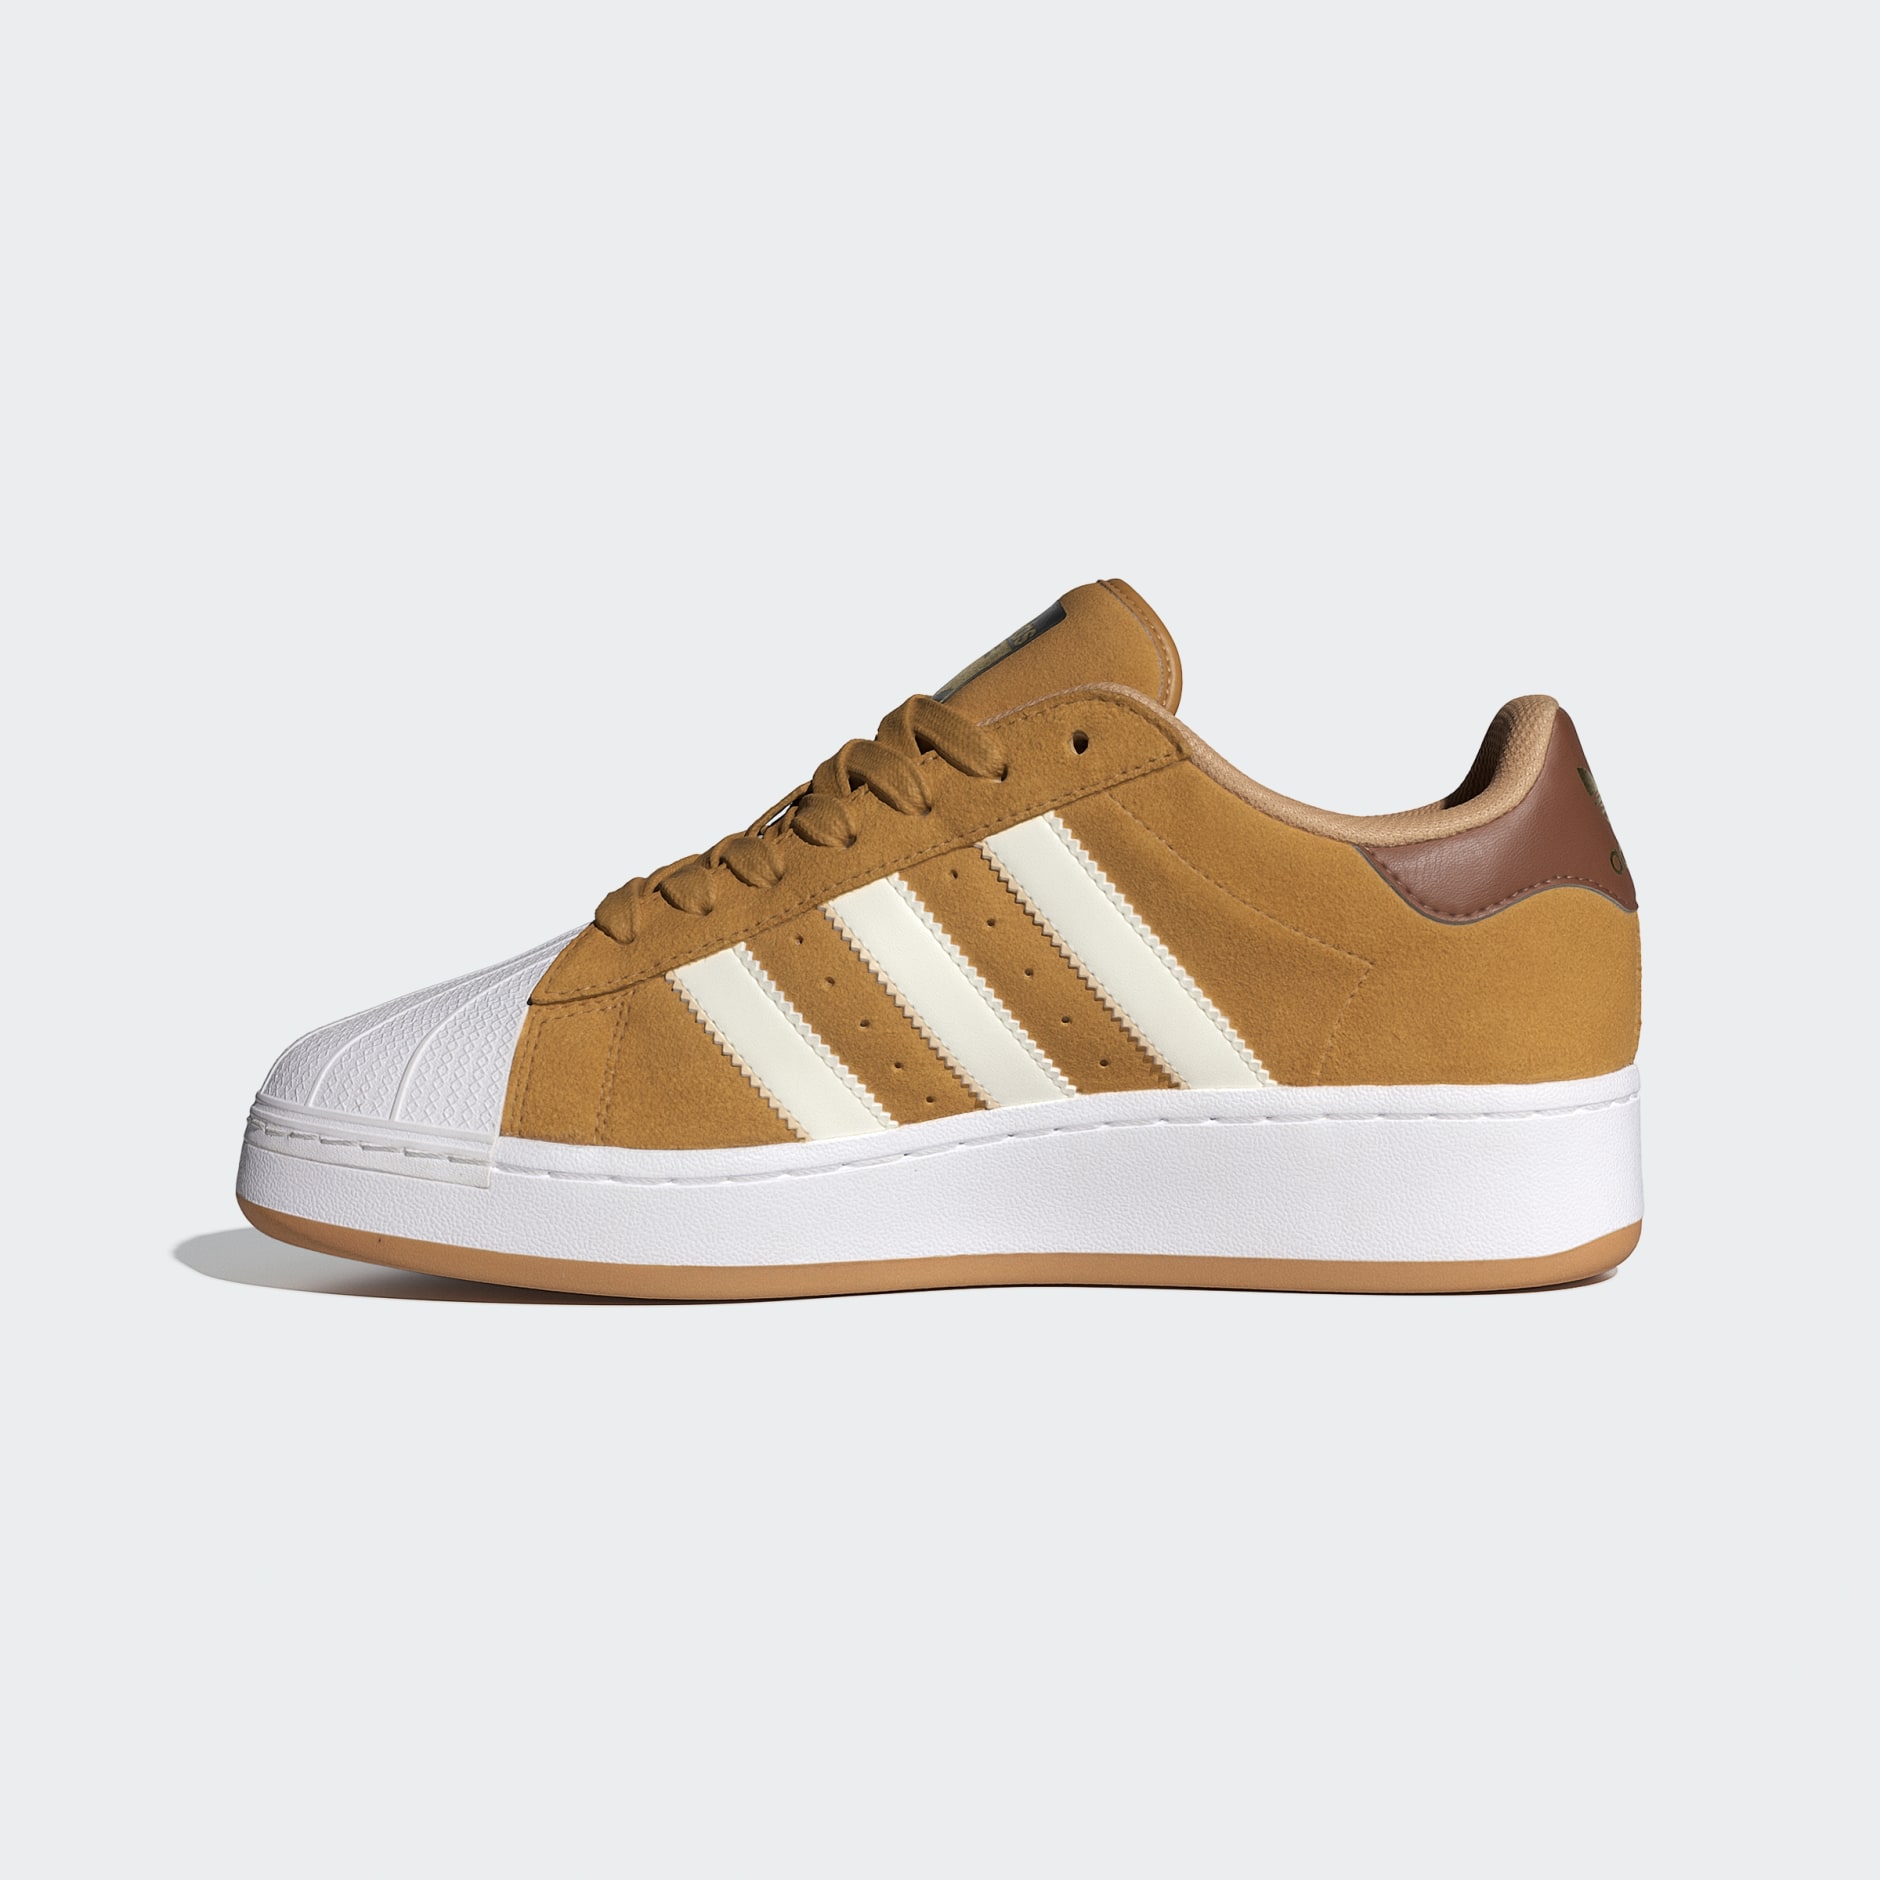 adidas Superstar XLG Shoes - Brown | adidas UAE